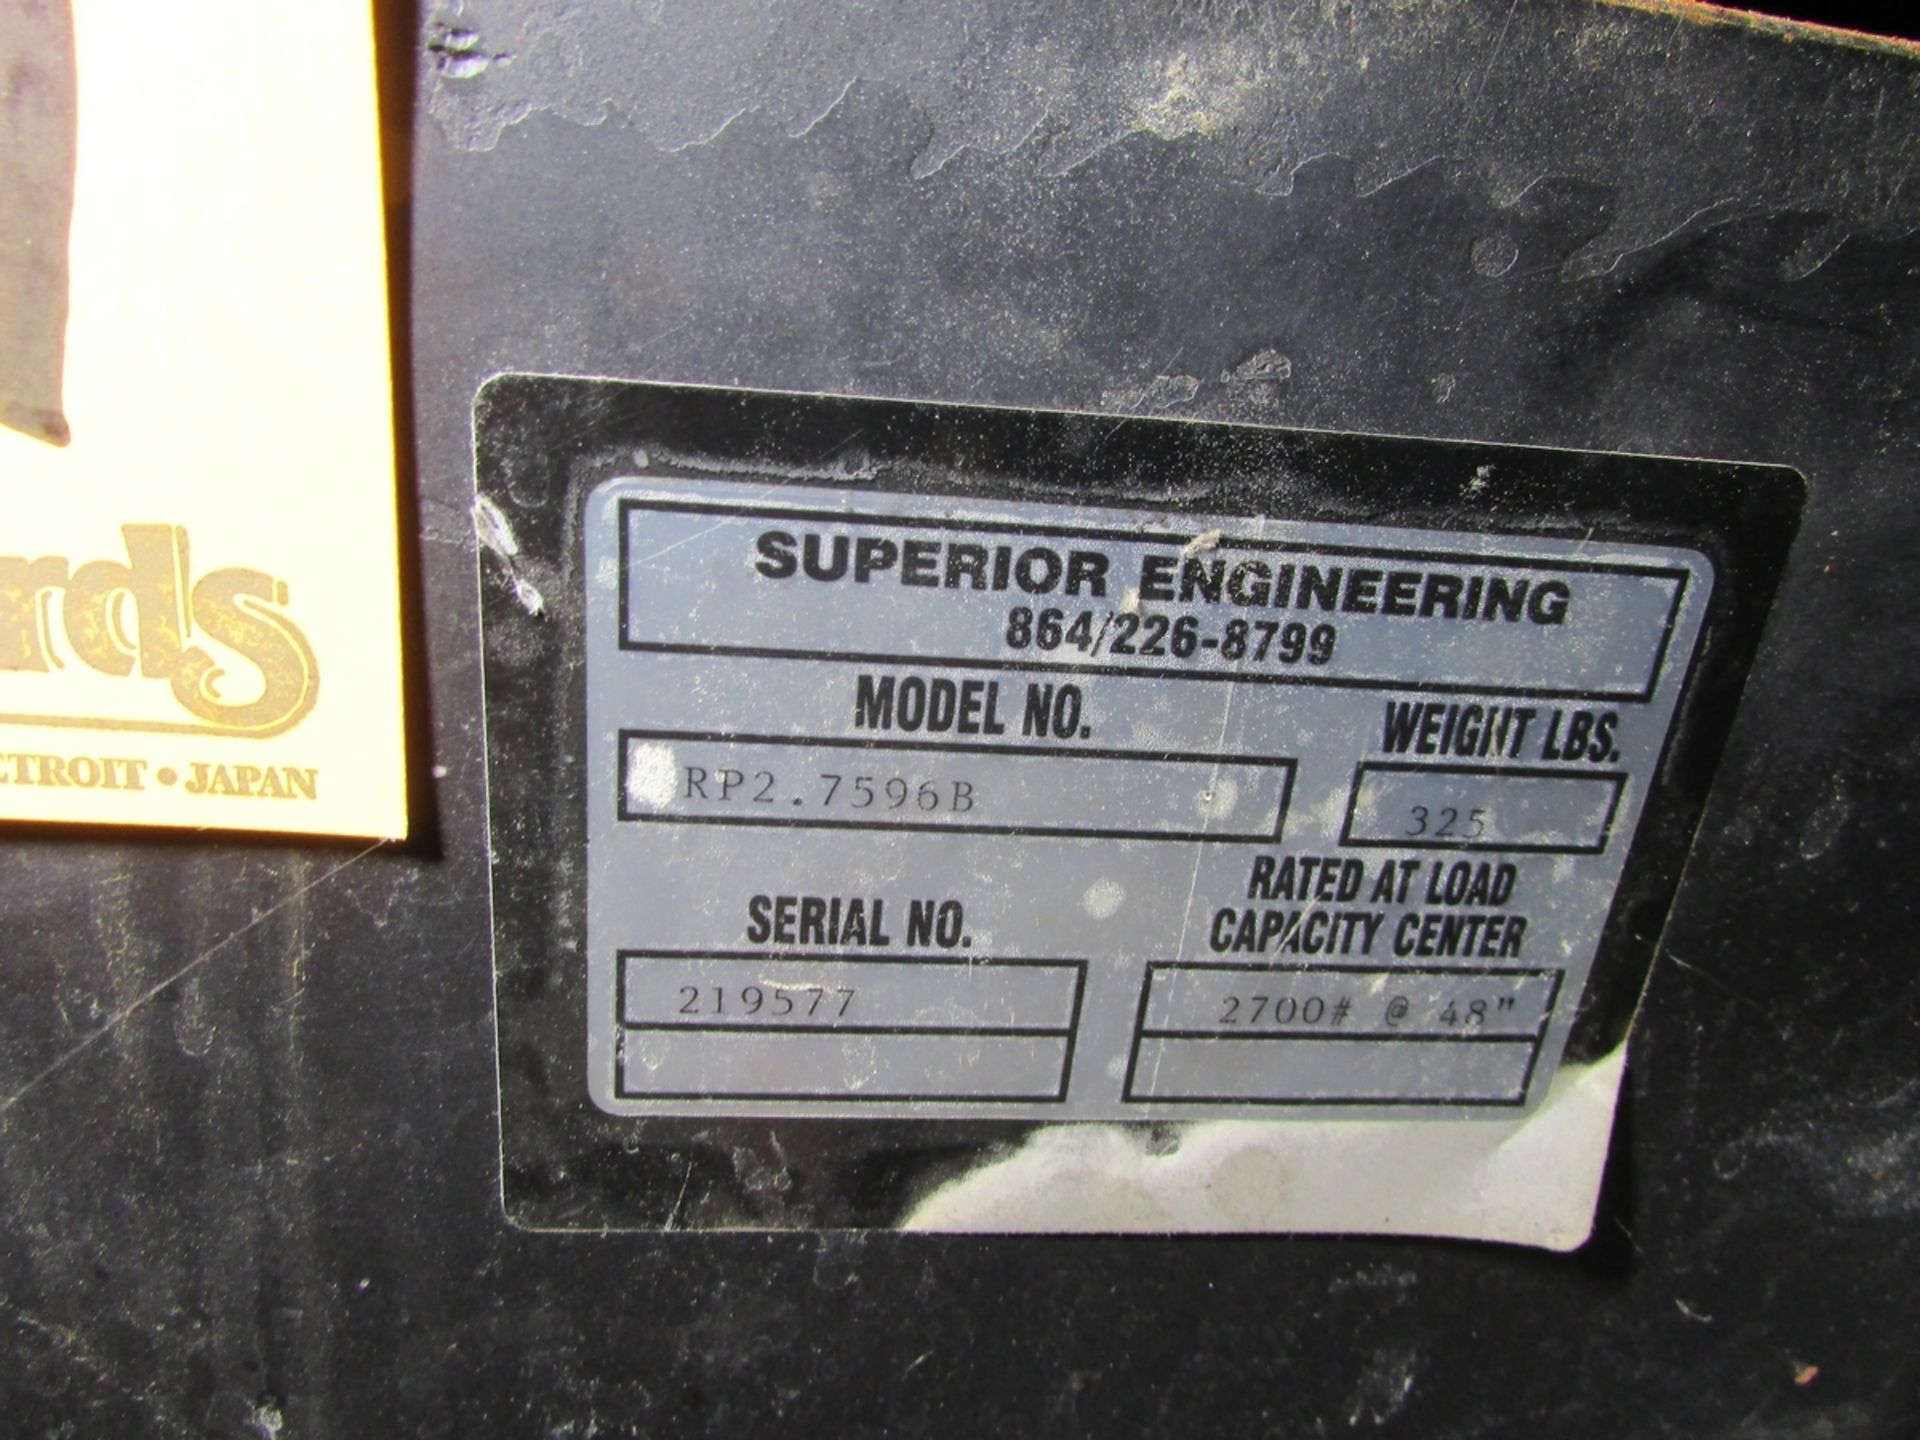 Superior Engineering RP2.7596B 48" Coil Ram Forklift Attachment - Image 3 of 3